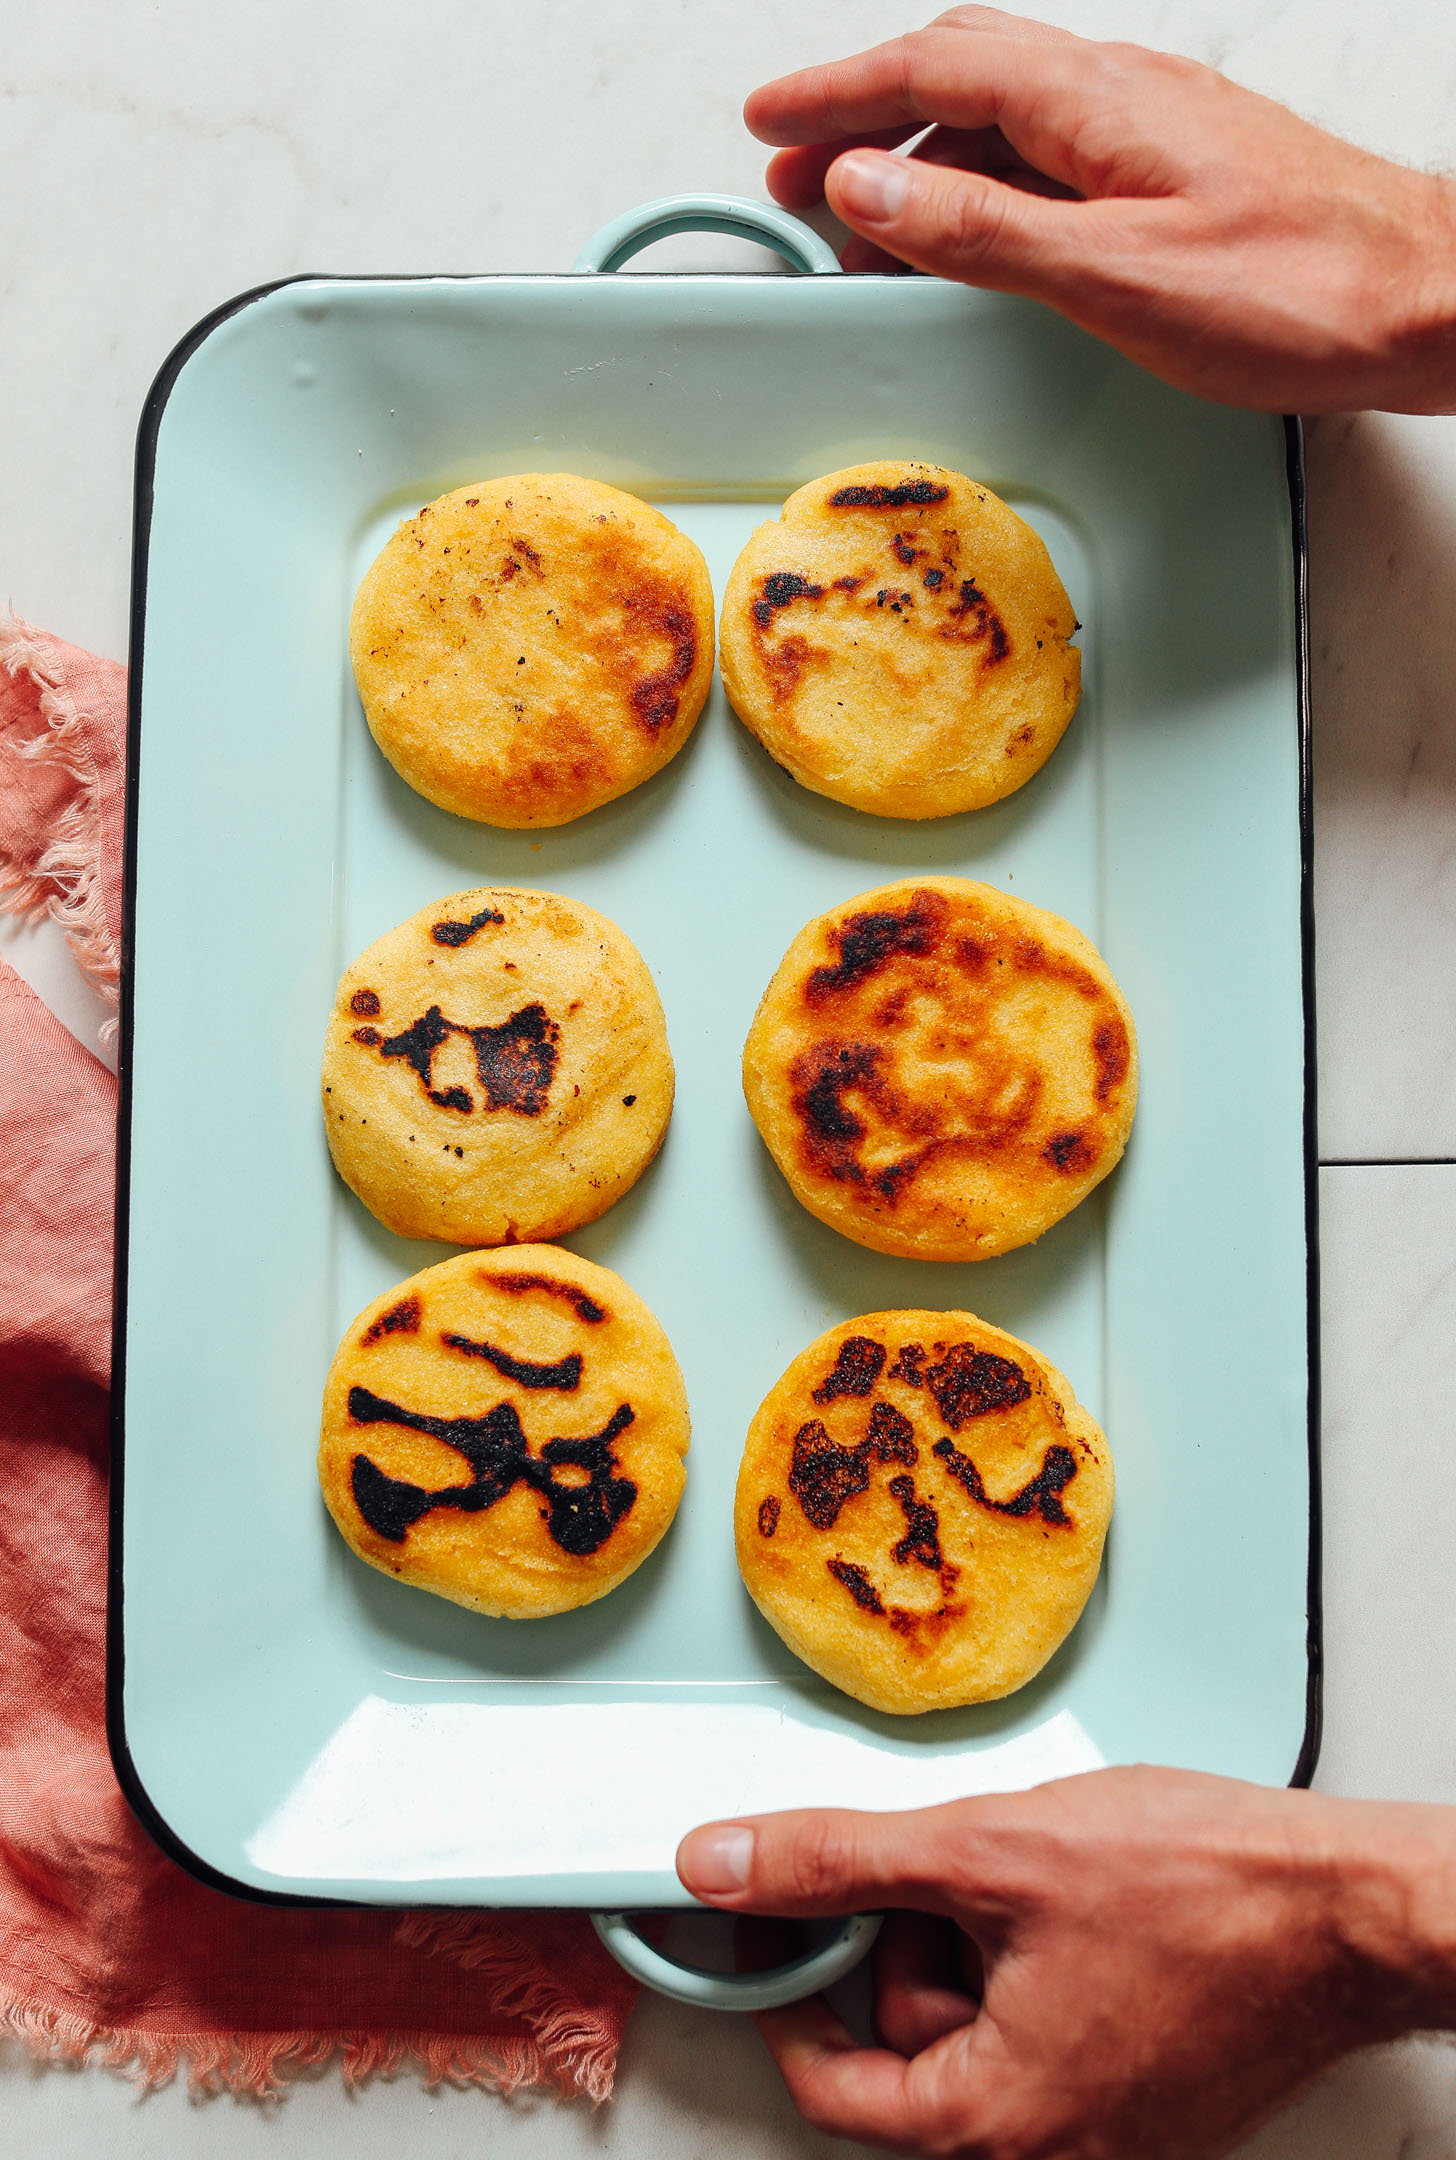 Tray of freshly cooked perfect homemade Arepas